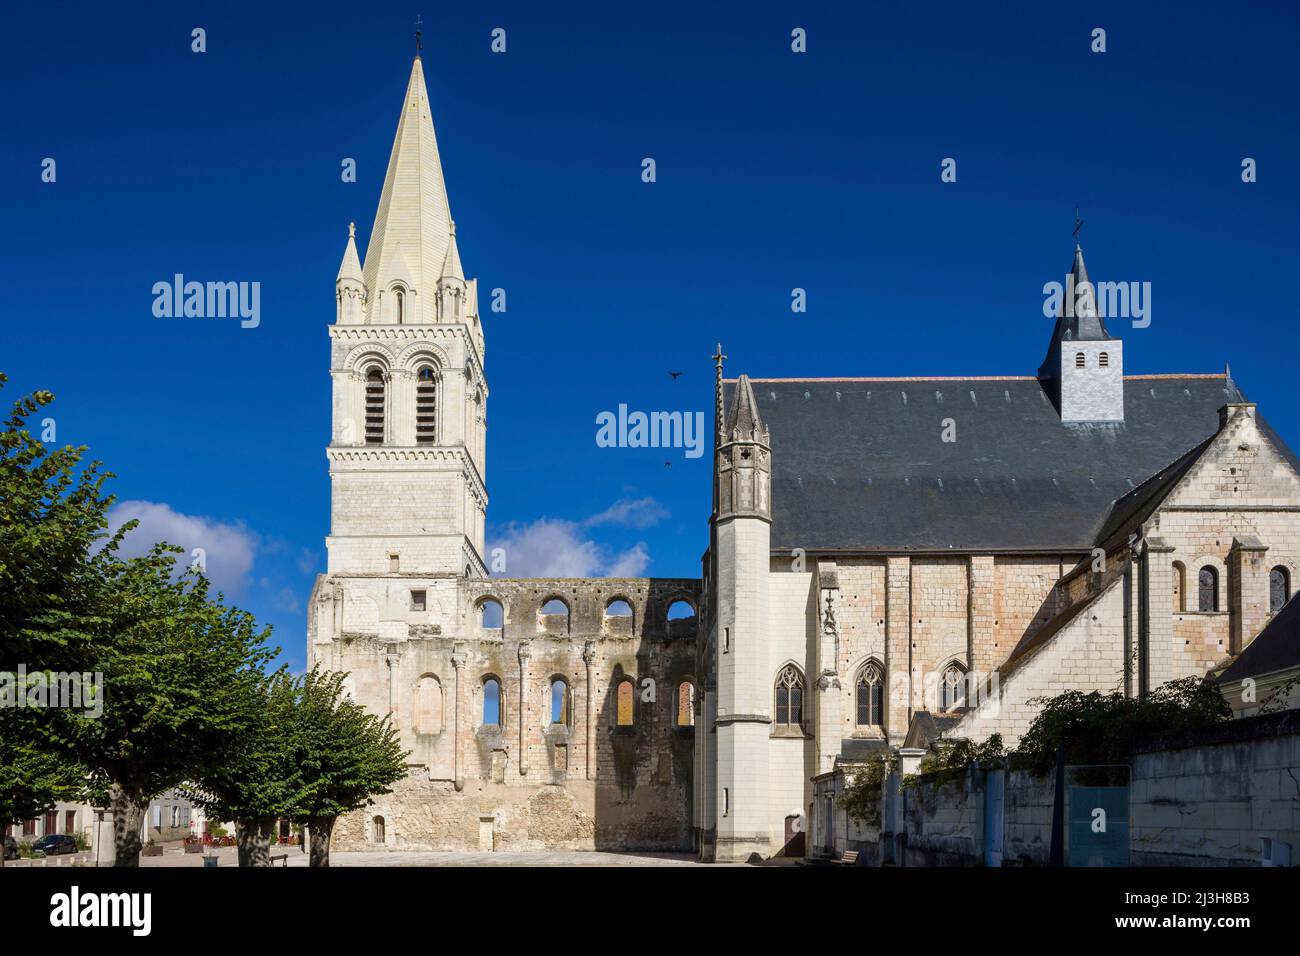 France, Indre et Loire, Loire valley listed as World Heritage by UNESCO, Beaulieu-les-Loches, the spire of the Grand Clocher of the abbey church, which is over 1000 years old, rises to 64 meters and was completely rebuilt in 2016-2017 Stock Photo